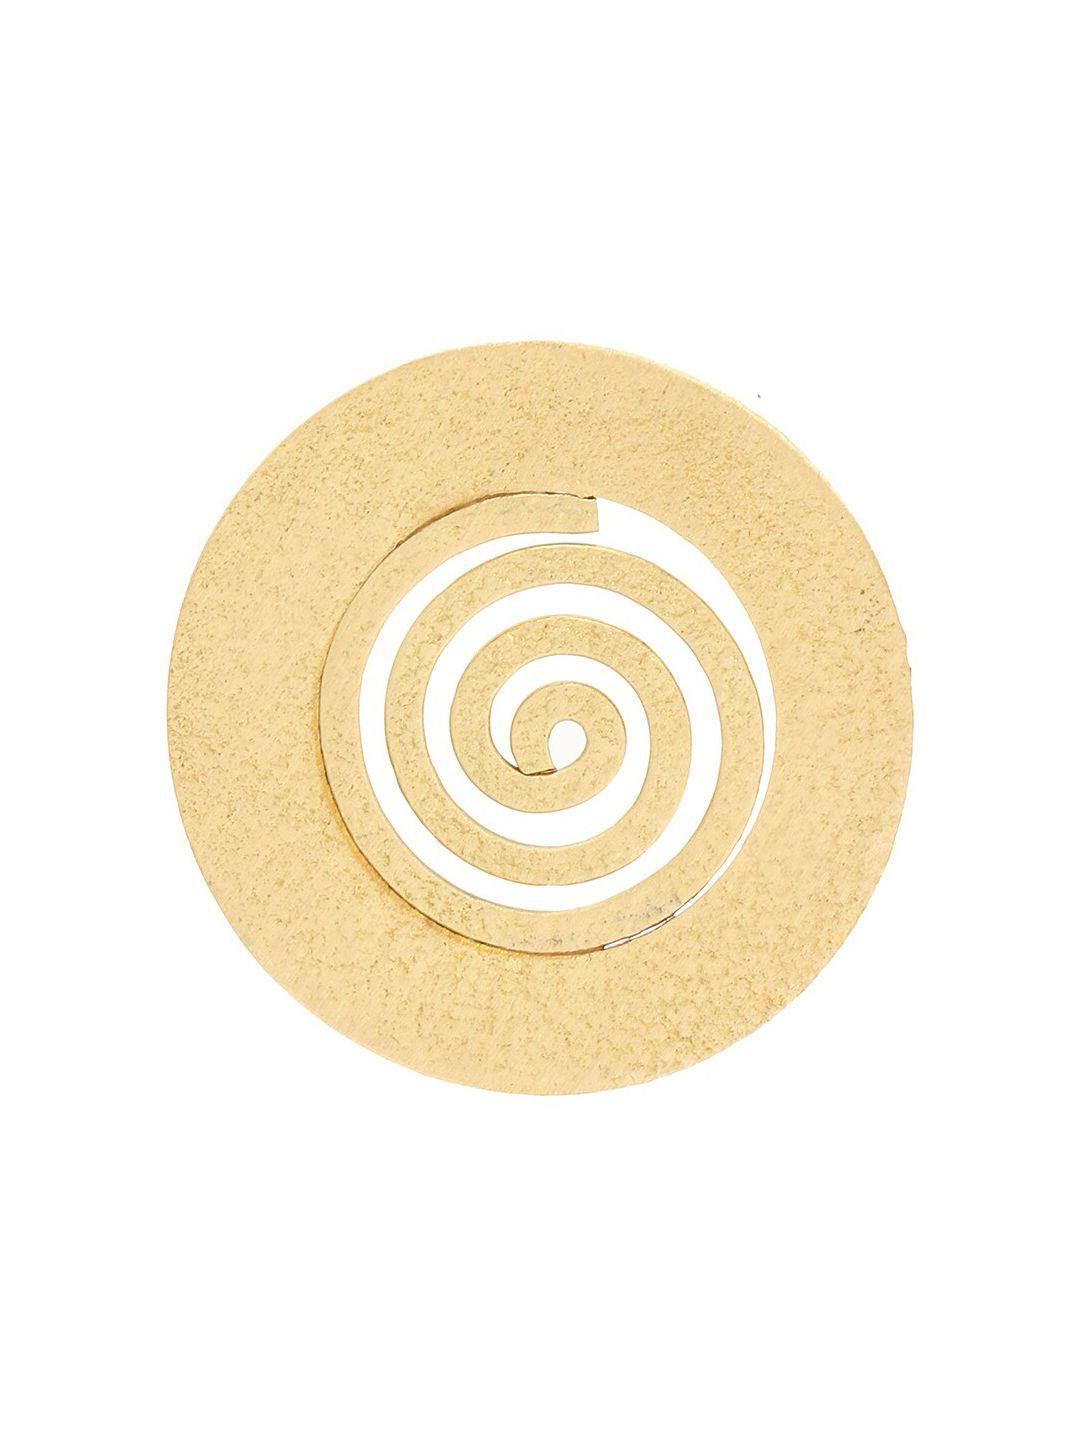 forever 21 gold-toned circular studs earrings